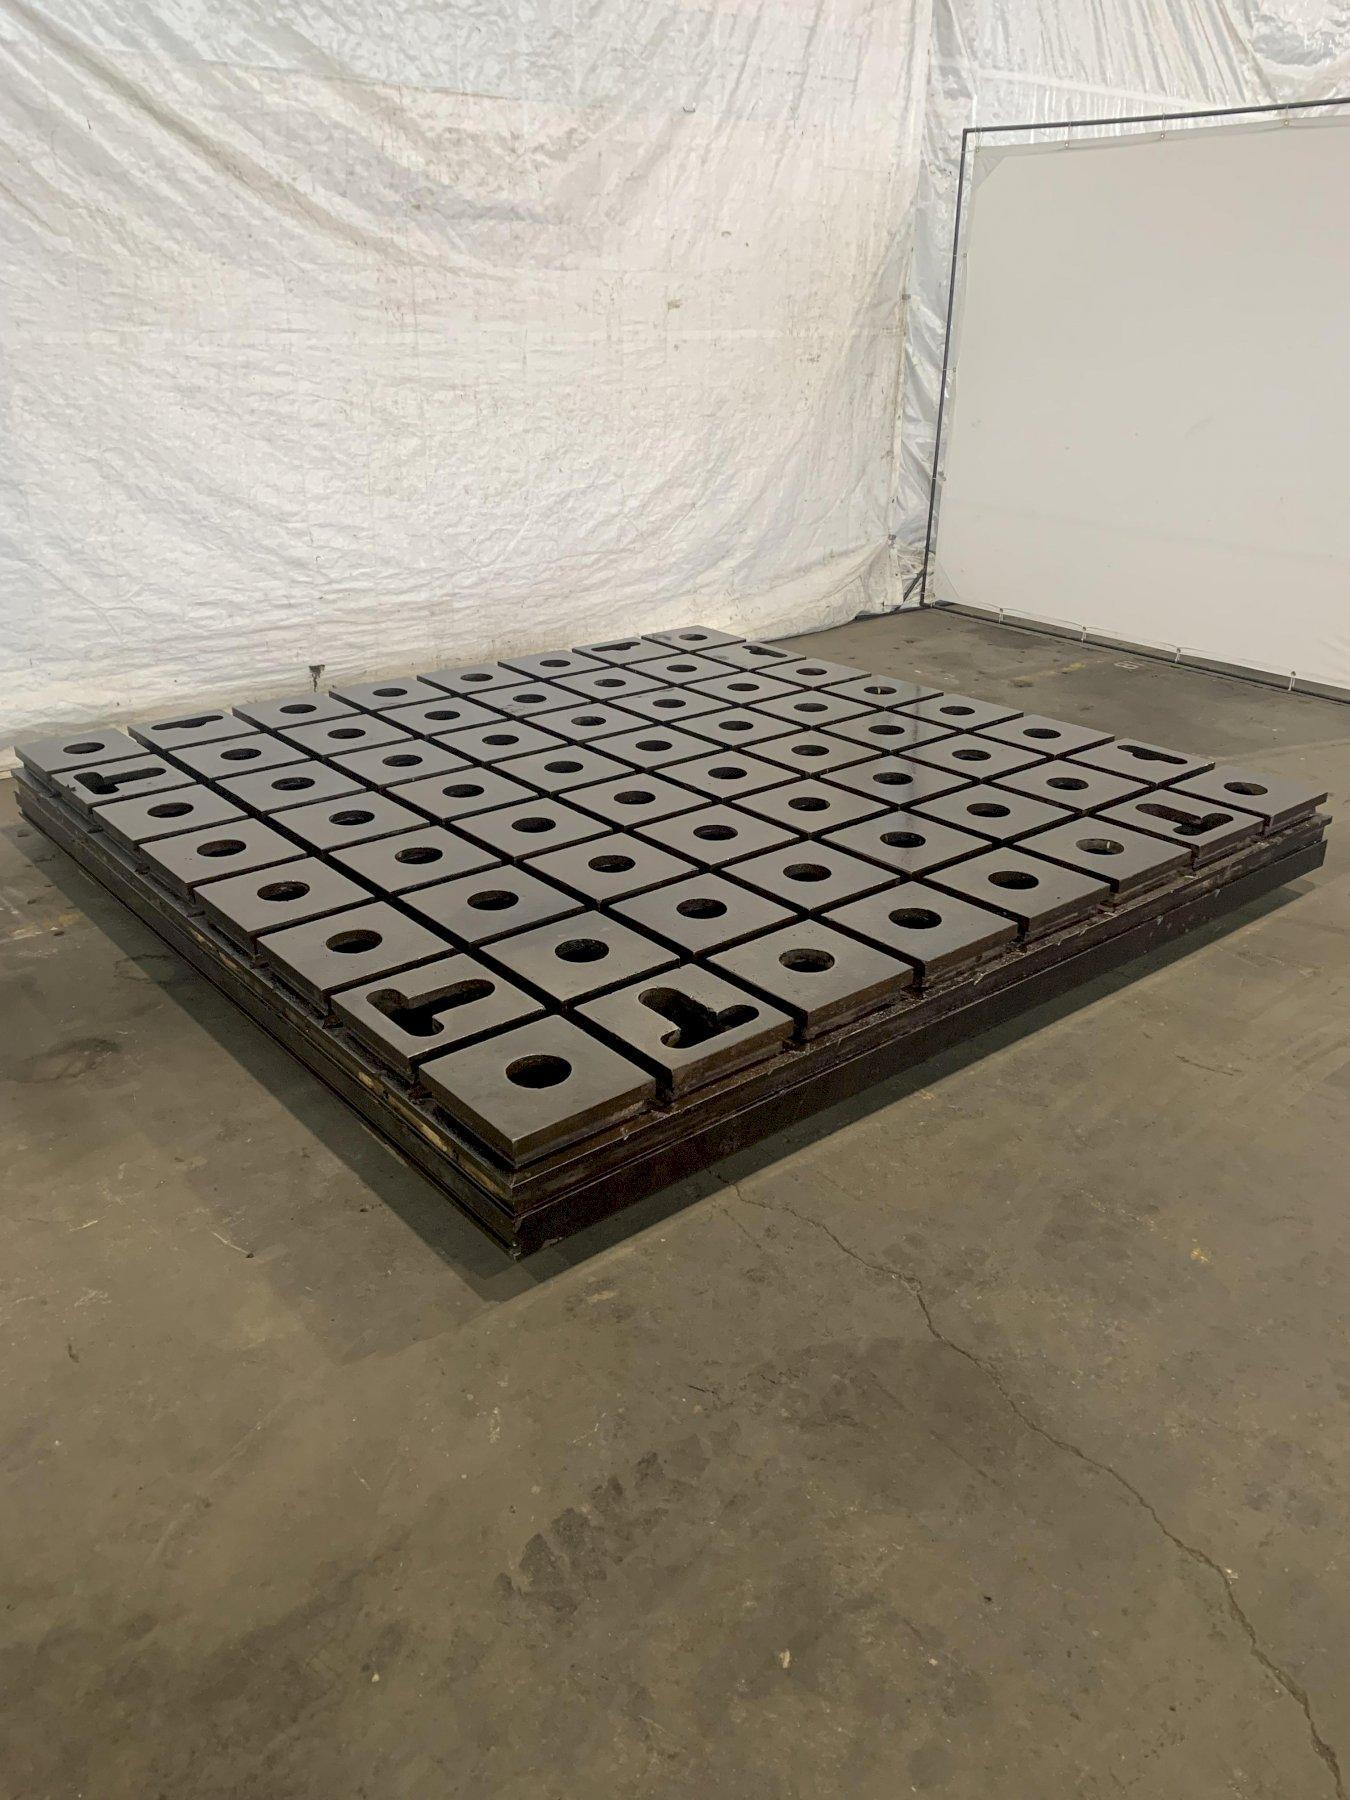 120" X 120" X 10" T-SLOTTED FLOOR PLATE. STOCK # 0416223